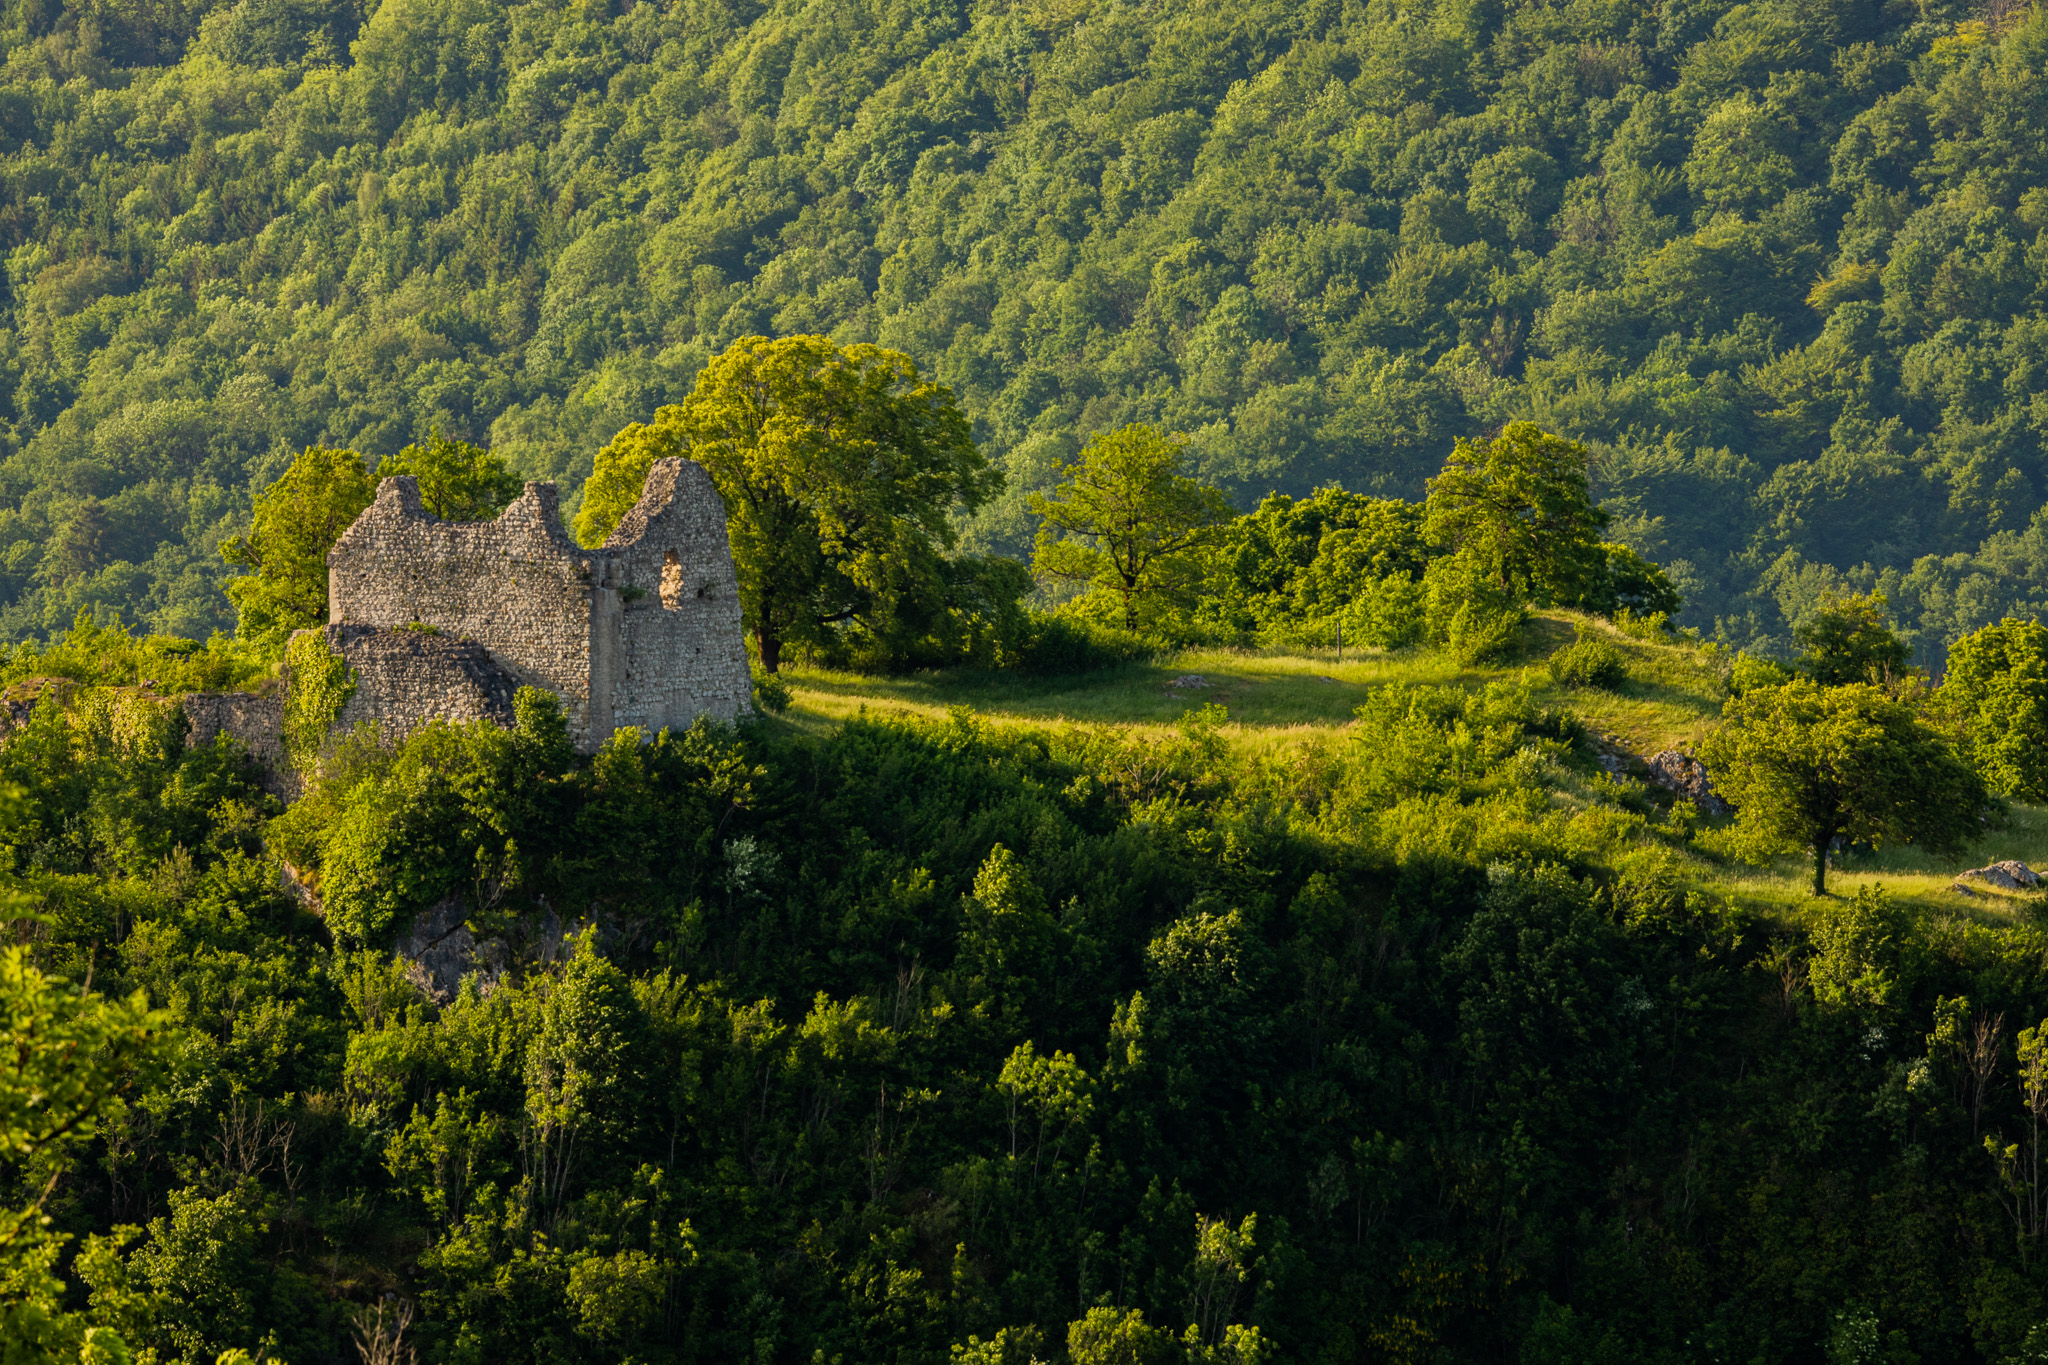 General 2048x1365 photography outdoors nature landscape greenery trees forest mountains hills castle ruins